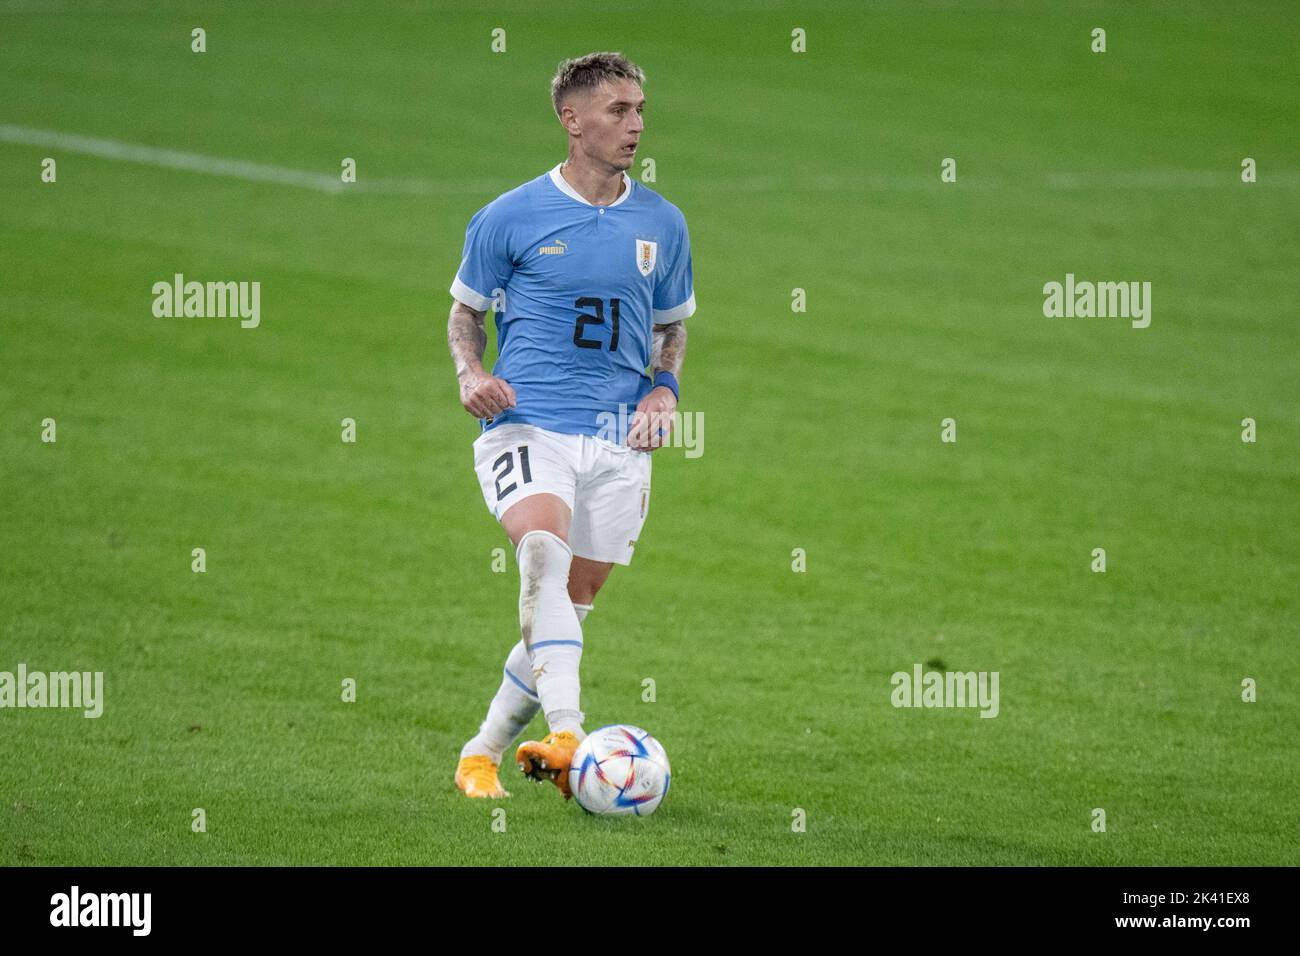 BRATISLAVA, SLOVAKIA - SEPTEMBER 27: Guillermo Varela of Uruguay control ball during the international friendly match between Uruguay and Canada  at T Stock Photo